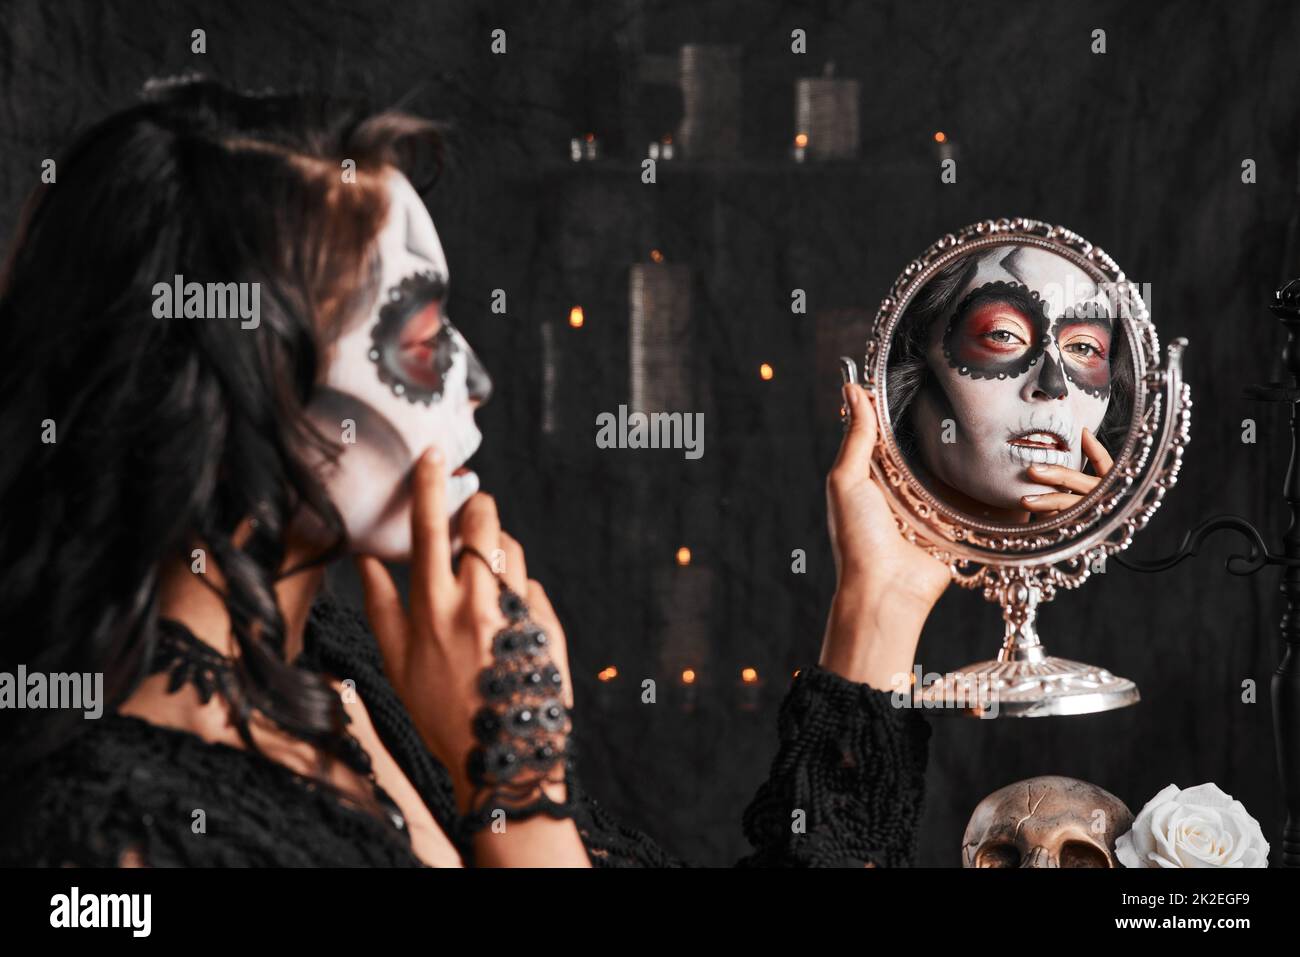 Halloween makeup on point. Cropped shot of an attractive young woman dressed in her Mexican-style halloween costume looking in a mirror. Stock Photo